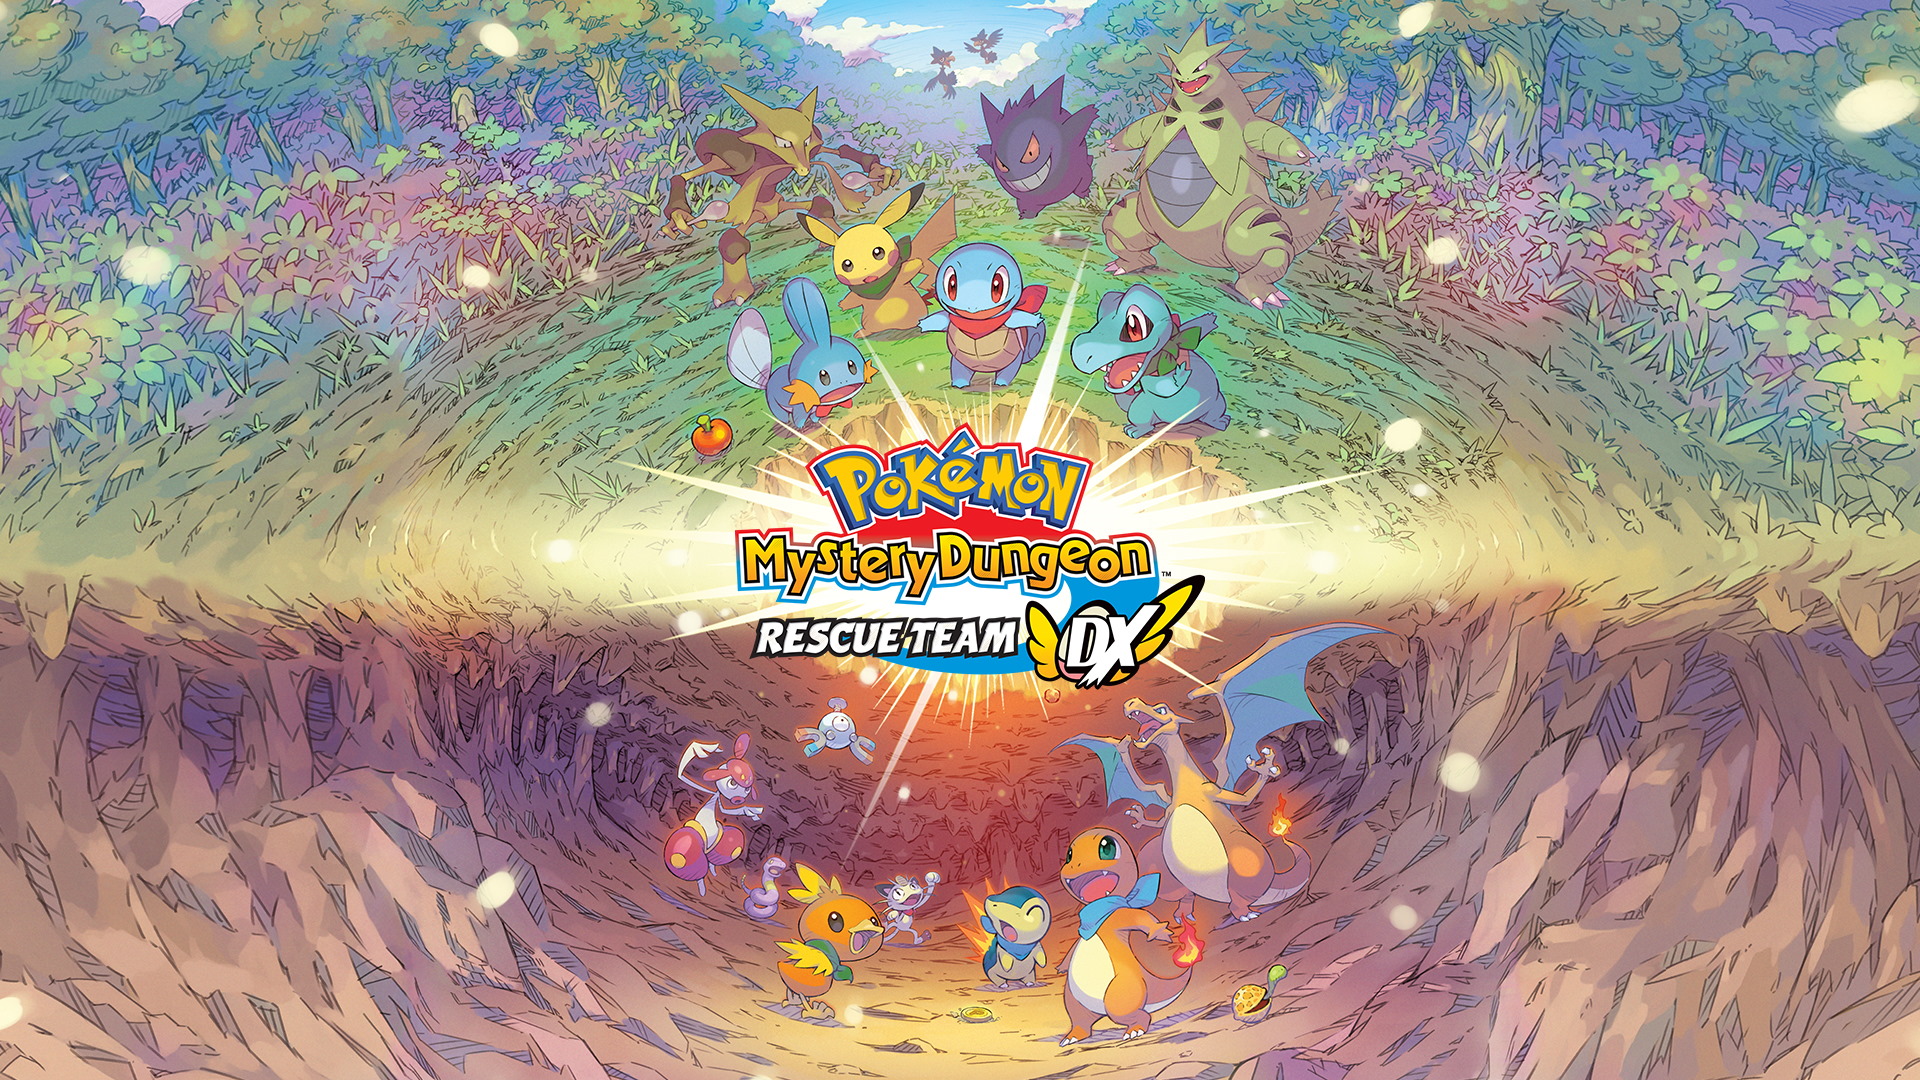 Pokemon Mystery Dungeon Rescue Team DX review